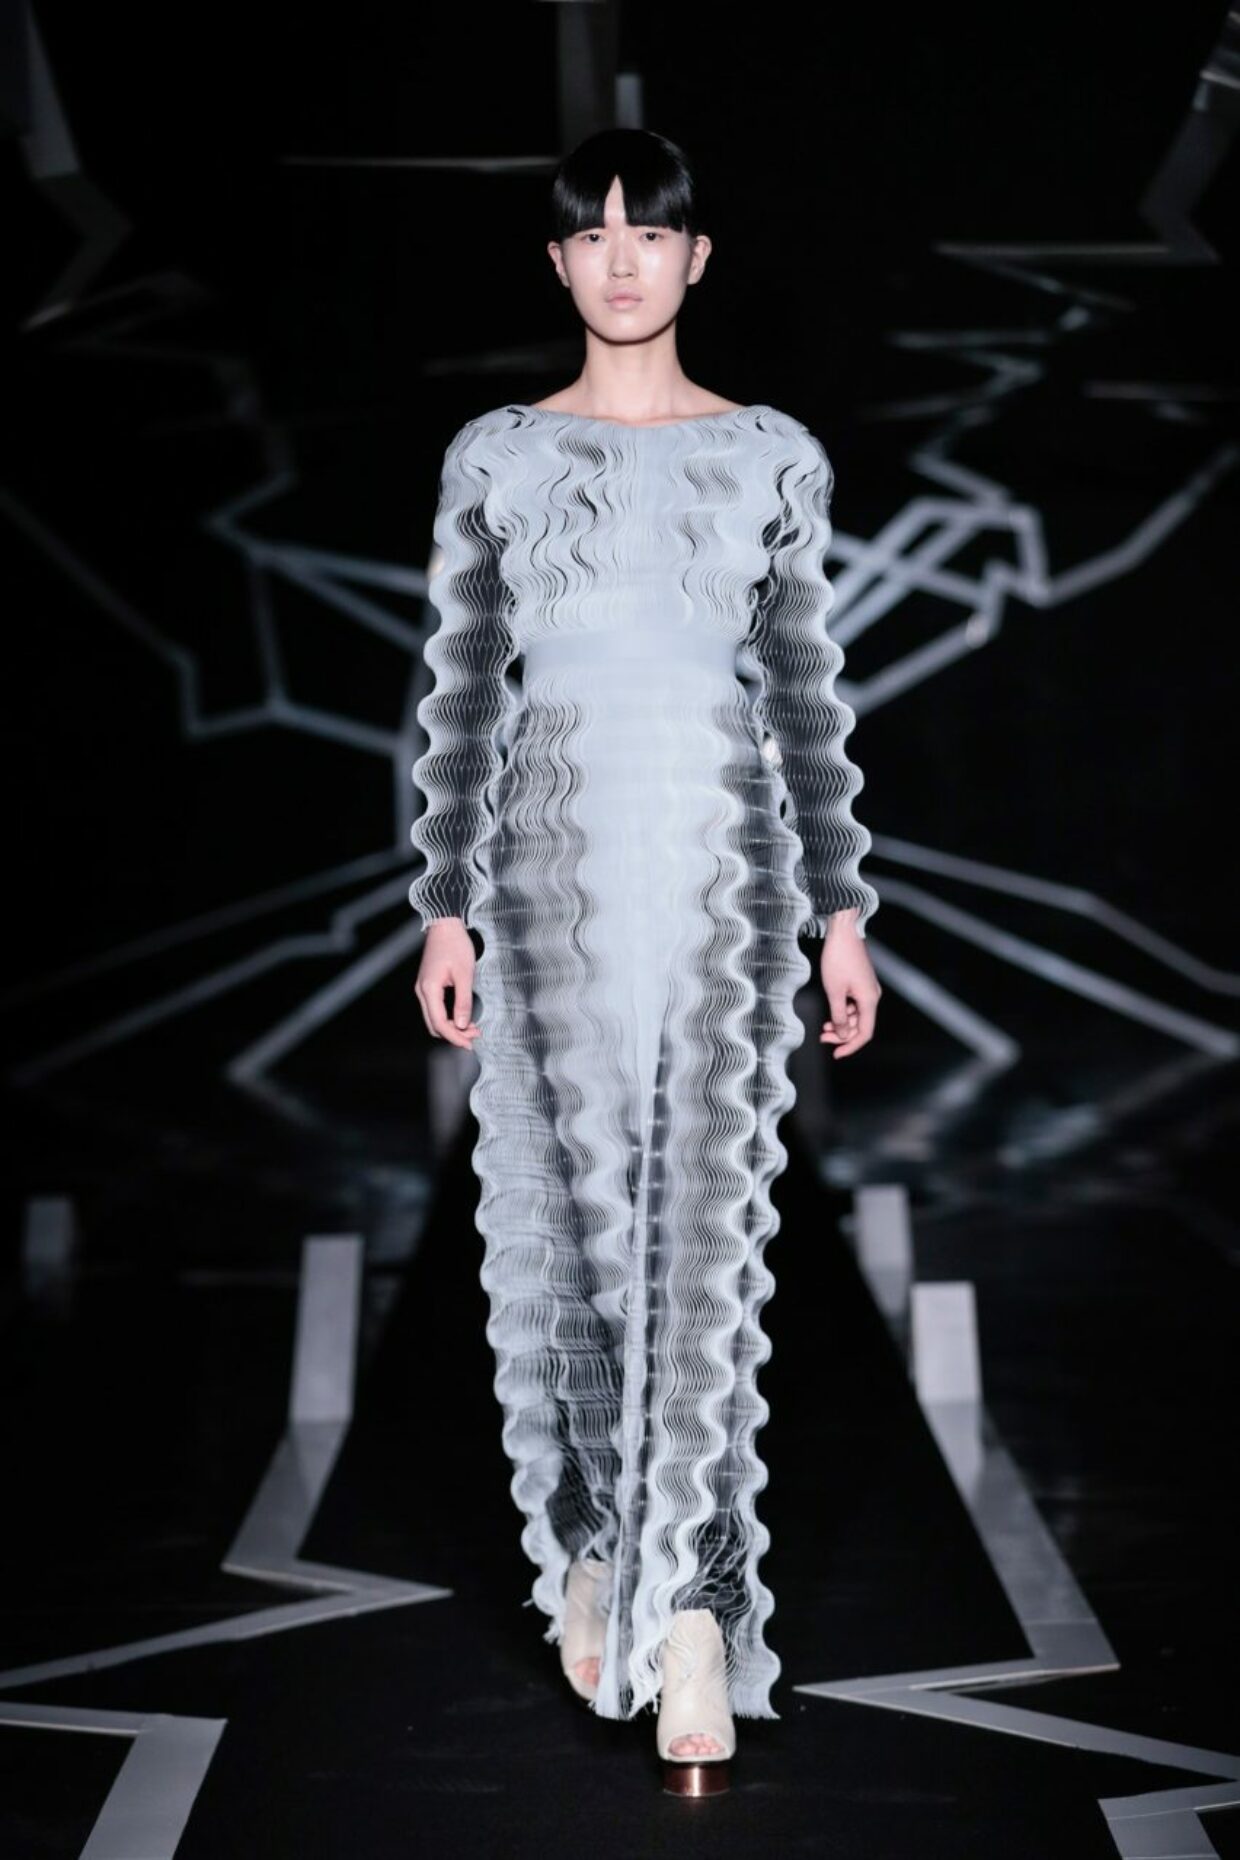 “There is so much in fashion that is unexplored” says Iris van Herpen in Dezeen’s exclusive video series | 5